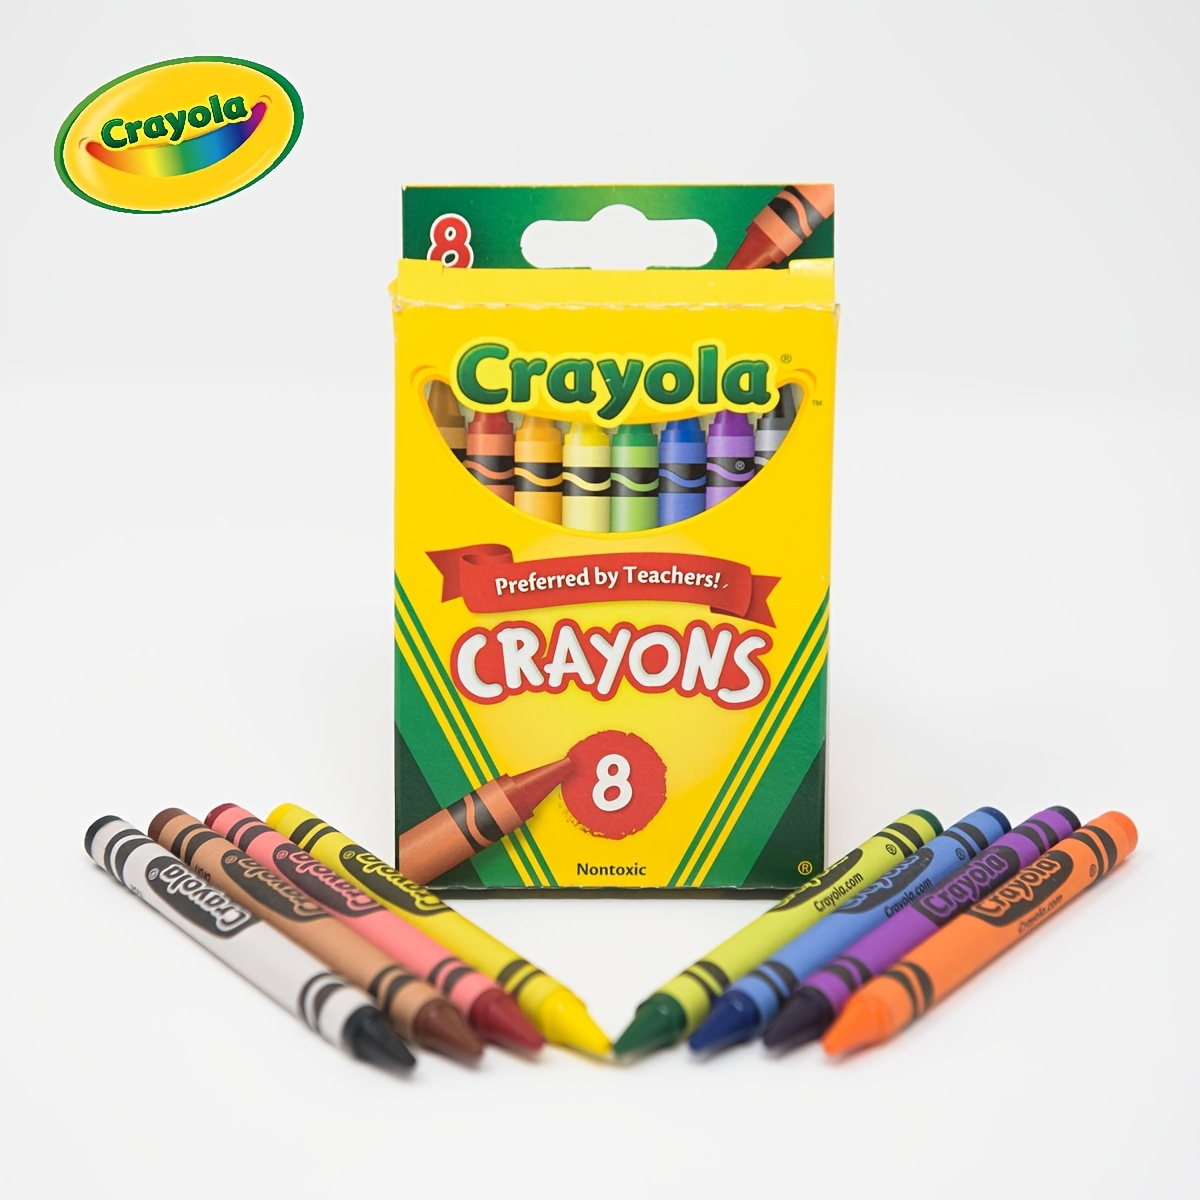 Peanut Crayons For Kids, Colorful Washable Toddler Crayons, Non